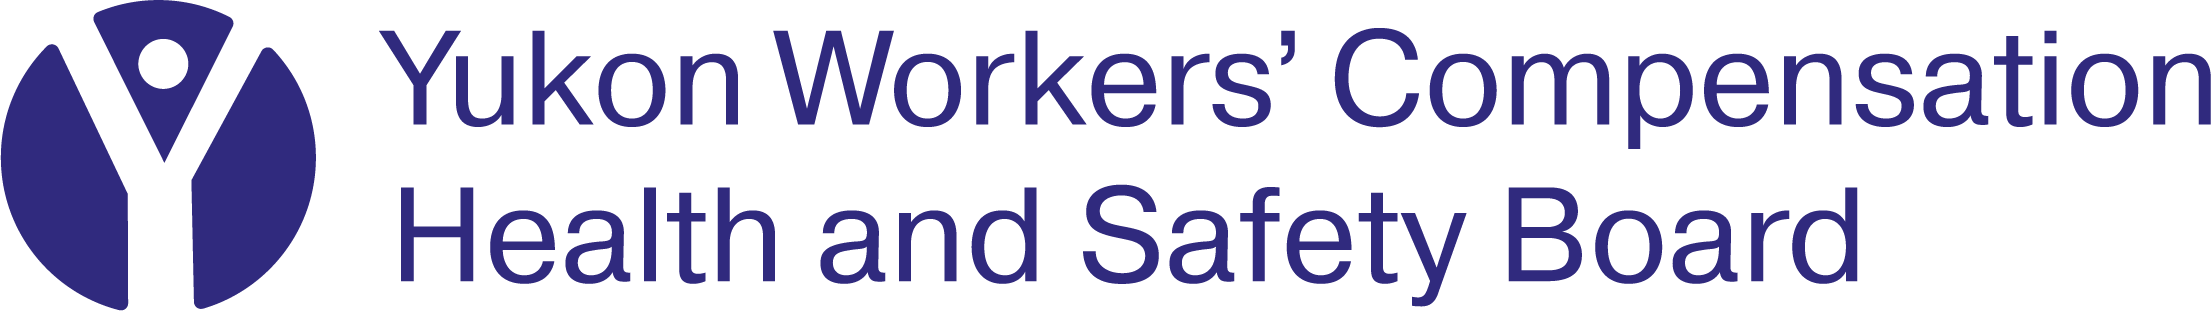 Yukon Workers Compensation Health and Safety Board